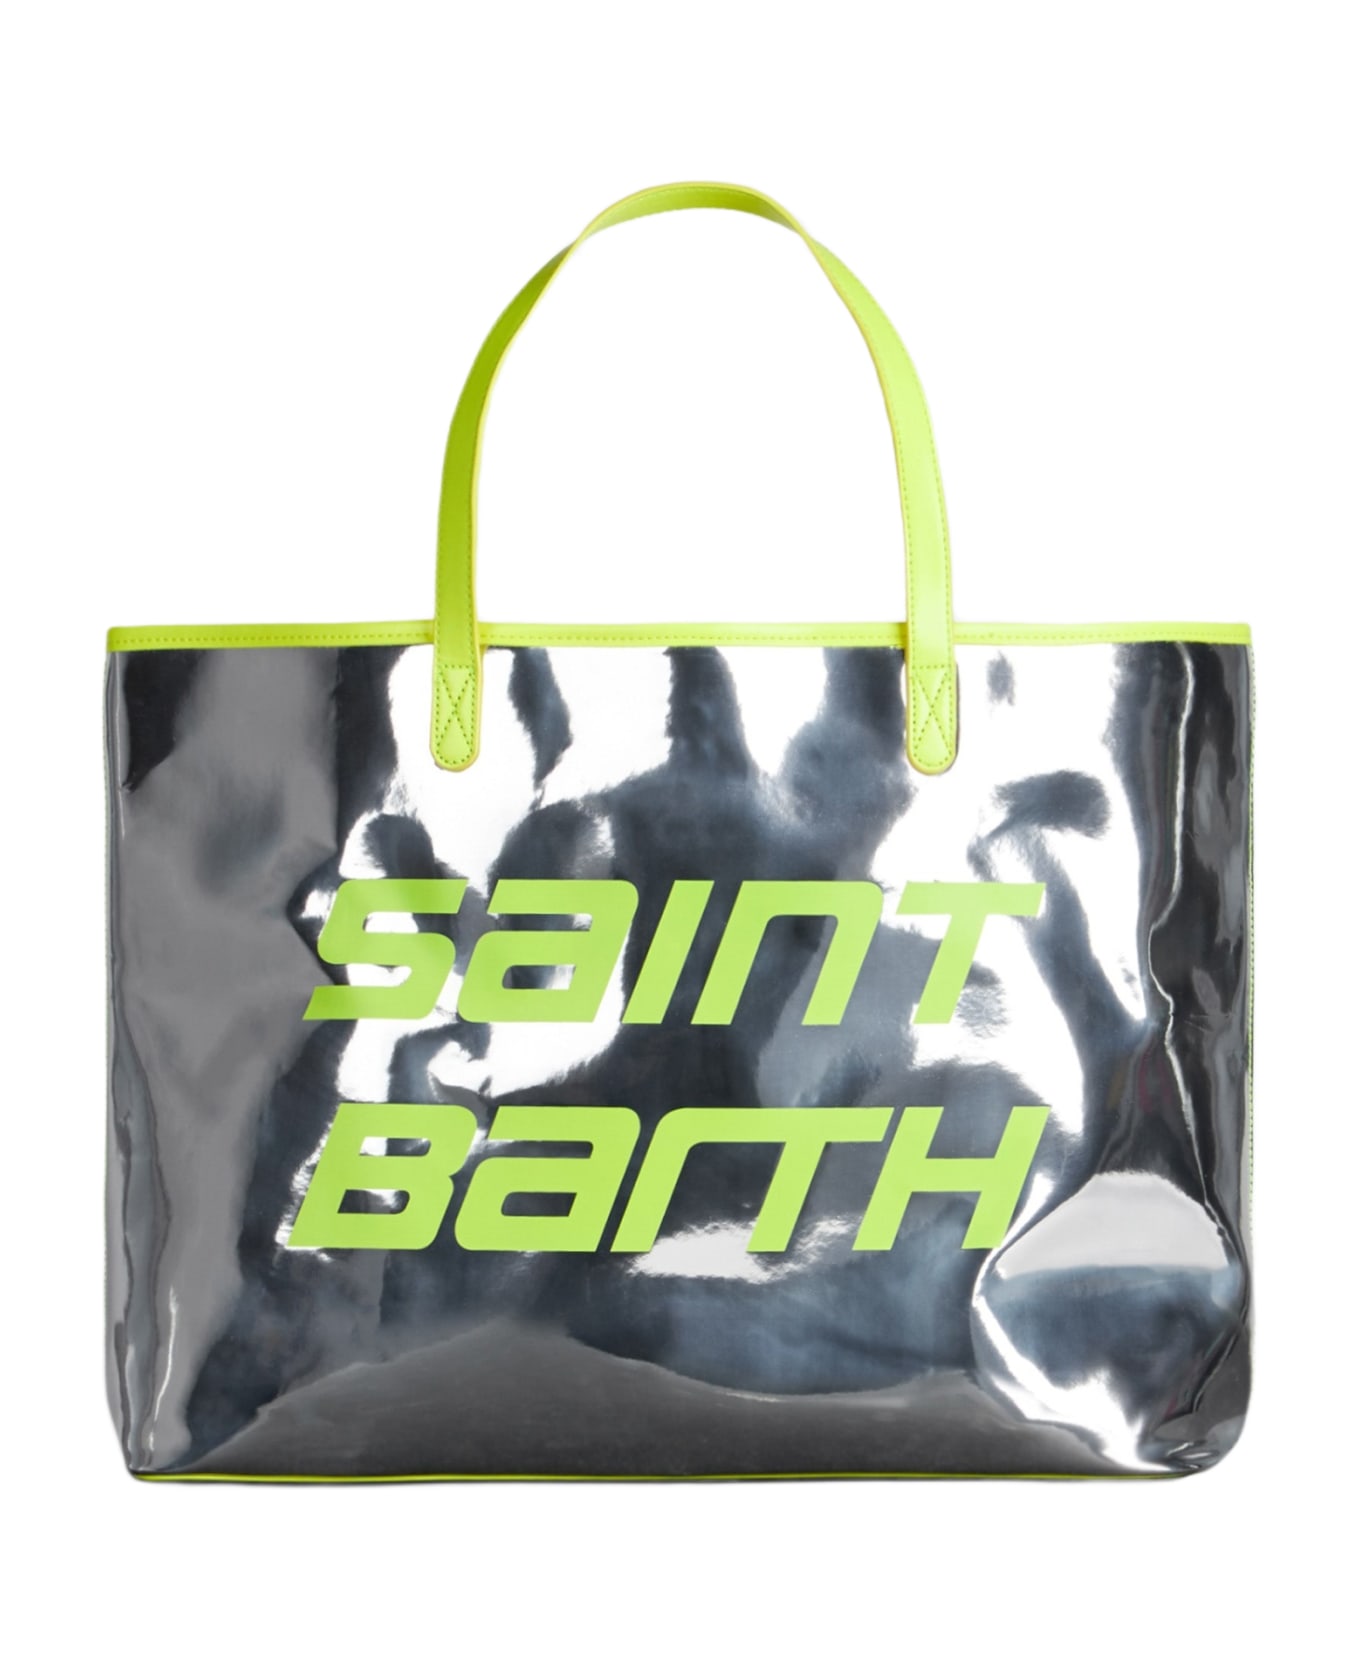 MC2 Saint Barth Silver Reflex Bag With Fluo Yellow Details - YELLOW